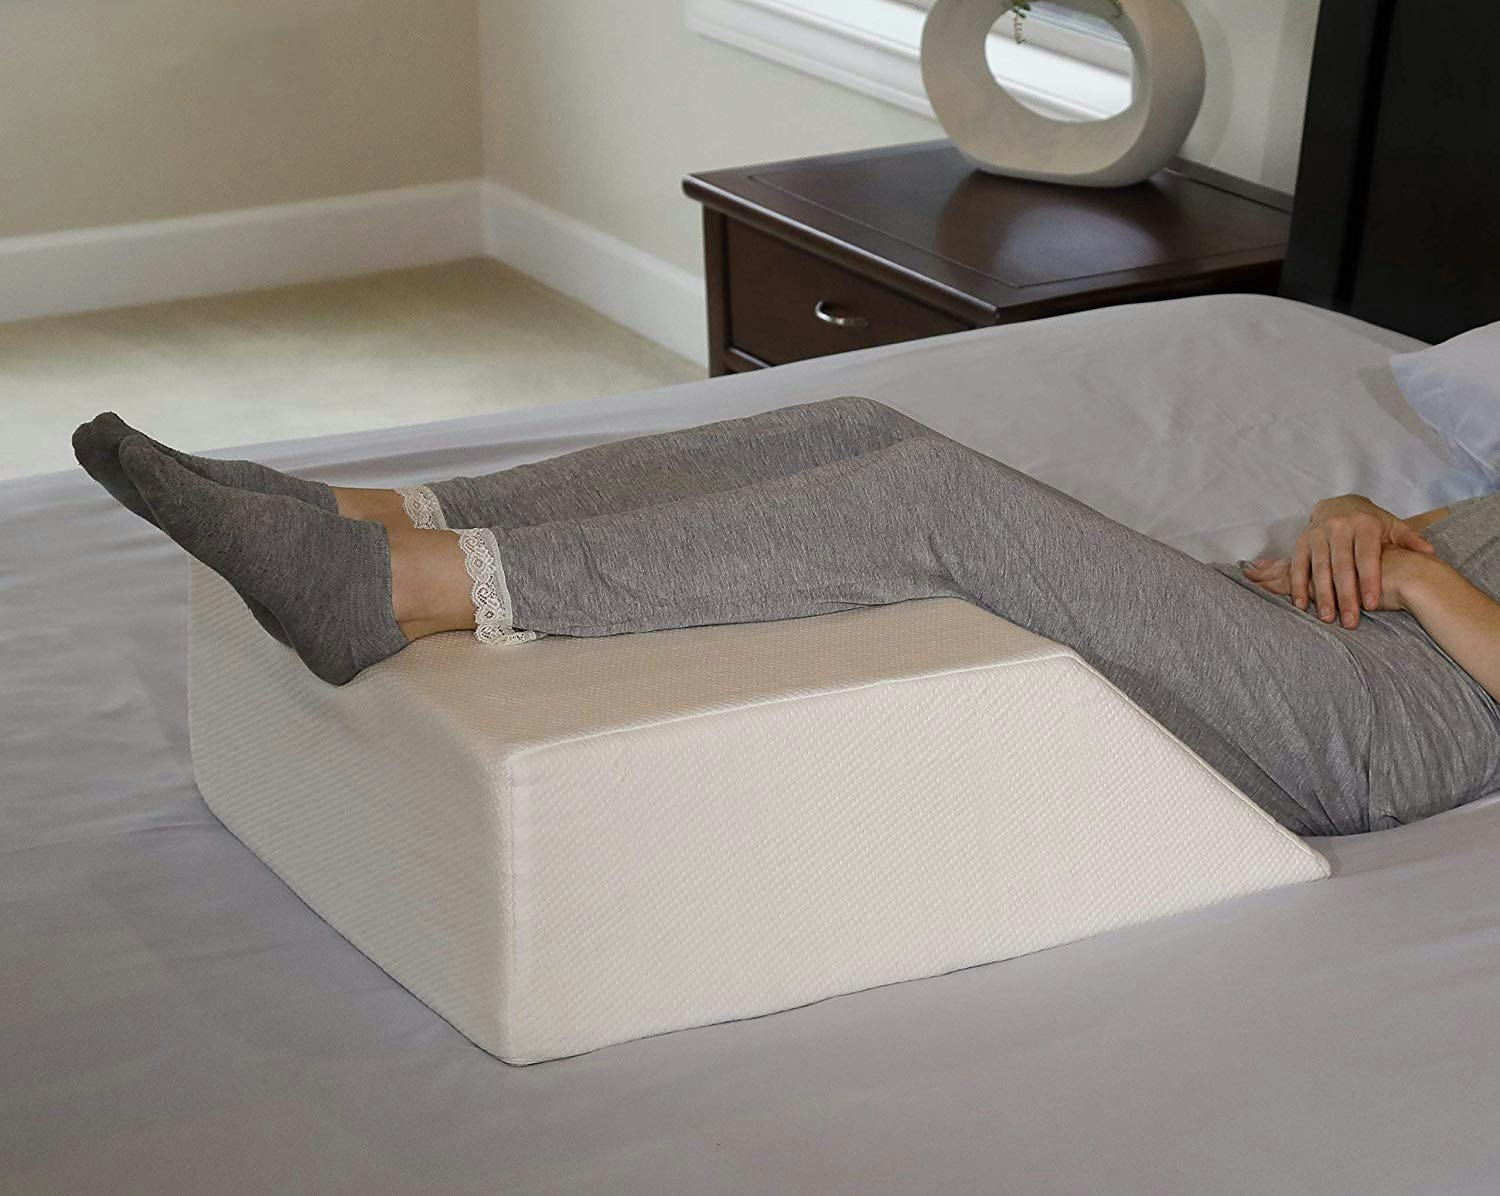 WEDGE FOAM PILLOW:-Ideal For Bed-bound And Elderly People With Back Problems.